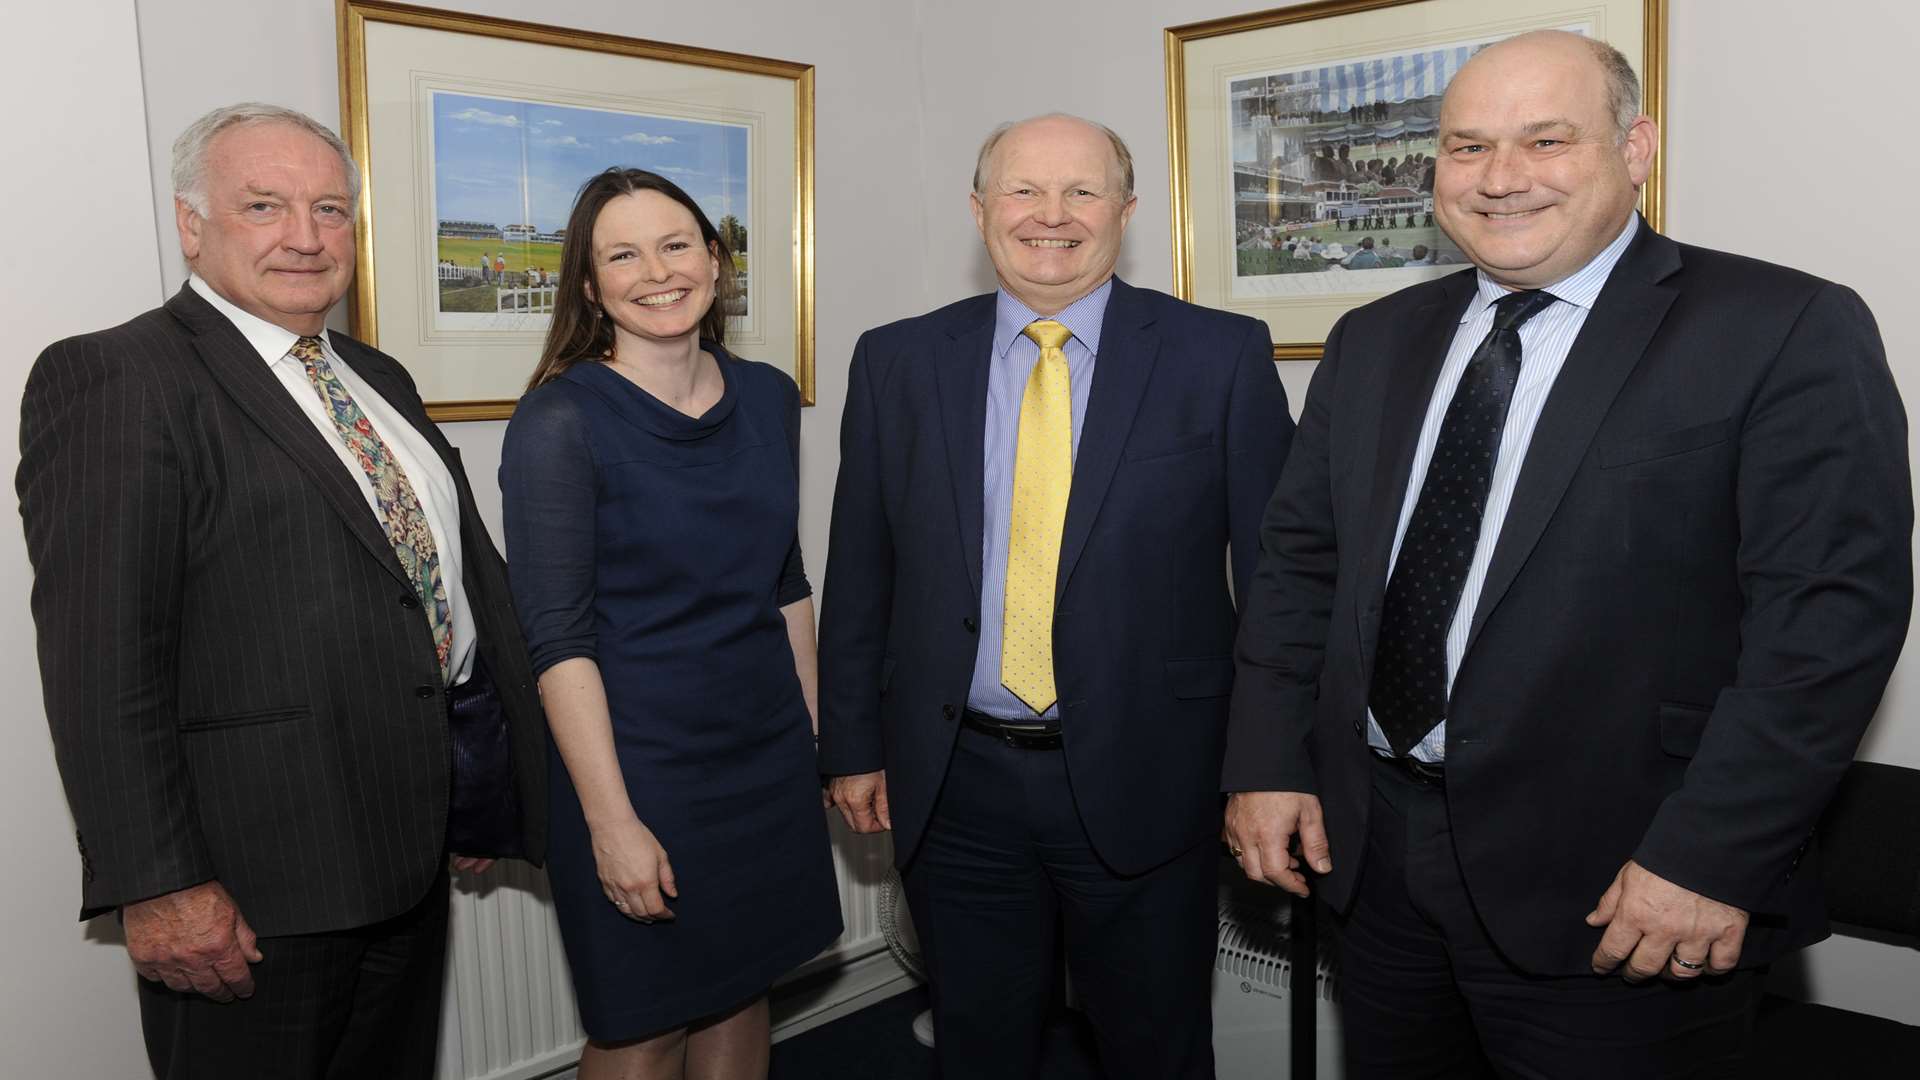 Tony Amlot, Claire Parry, Nigel Cripps and Rob Reynolds reveal the merger of Lakin Clark with Wilkins Kennedy